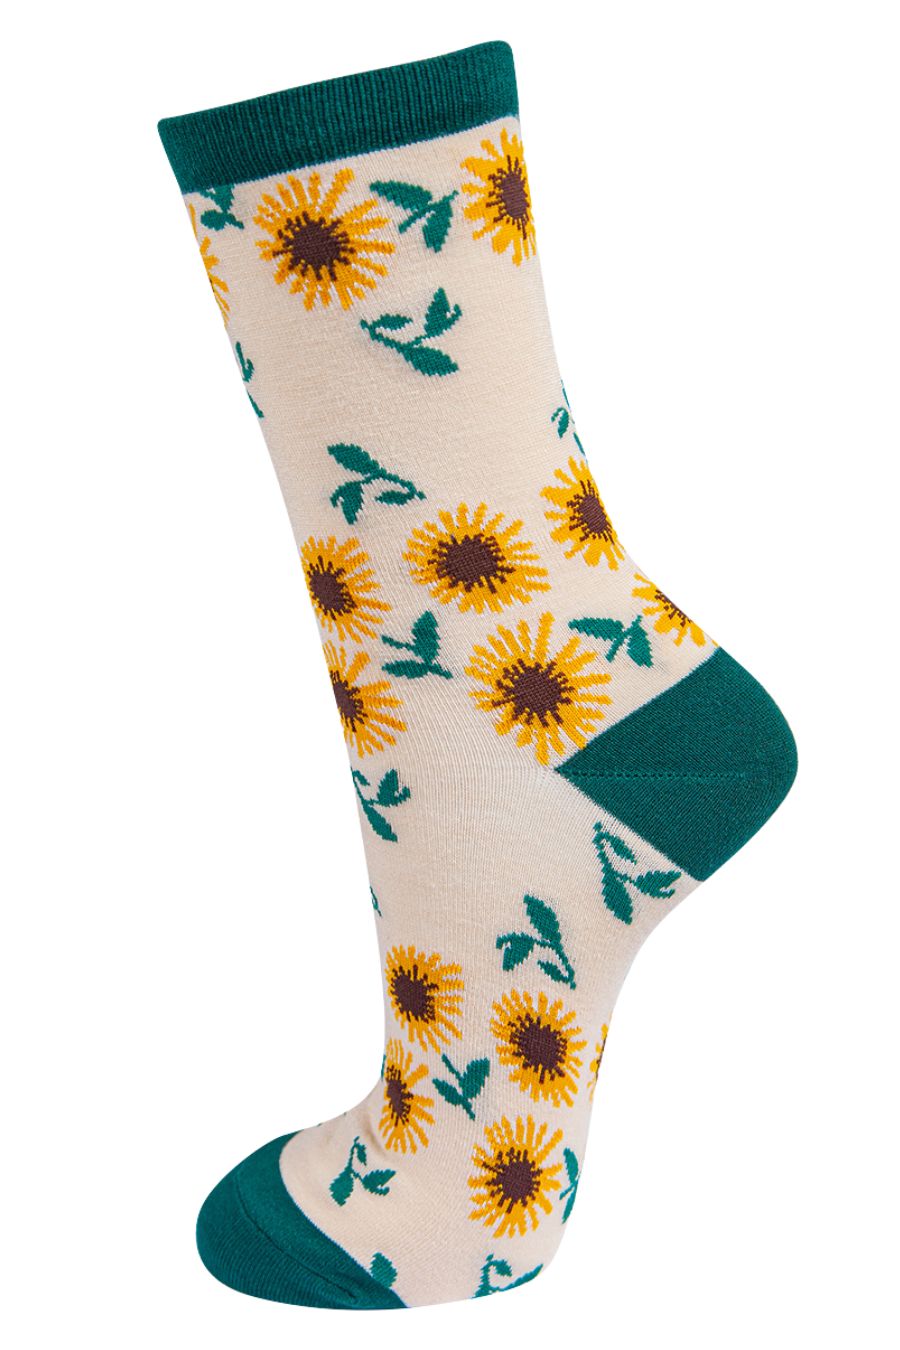 cream, green ankle socks with an all over yellow sunflower pattern